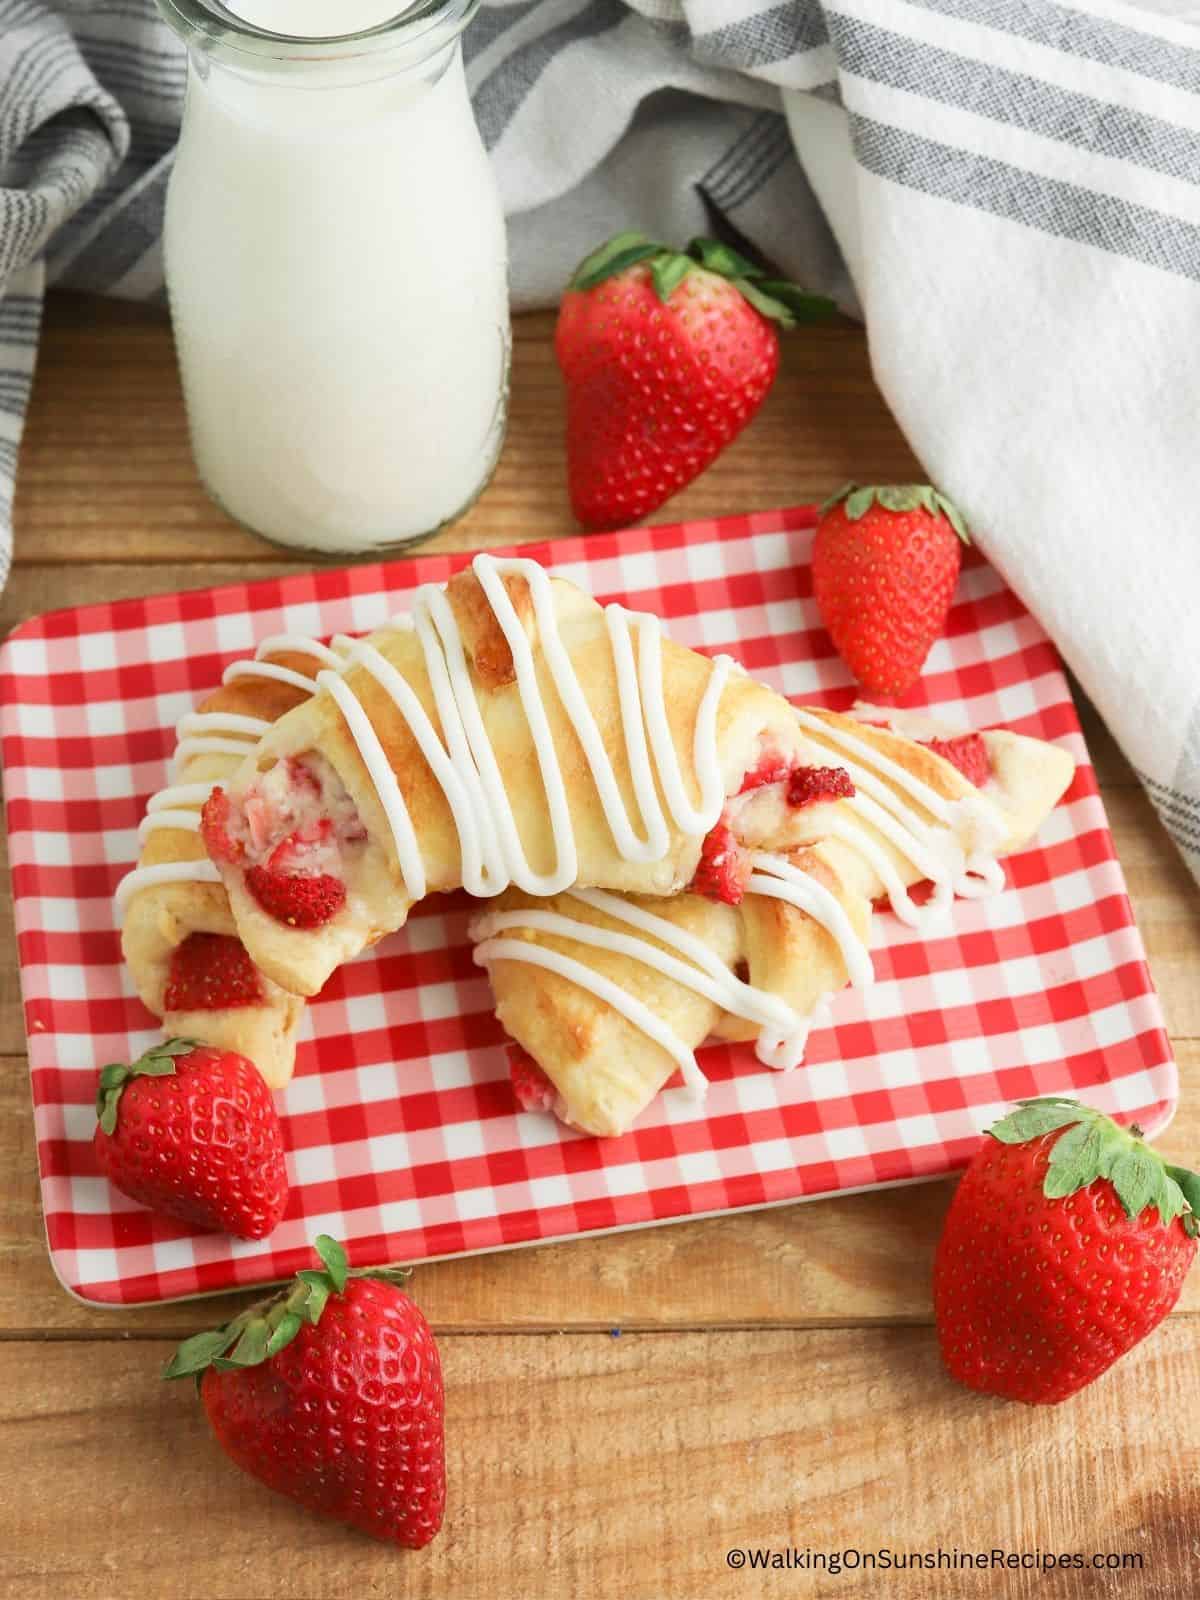 Crescent rolls on red checked plate with fresh strawberries.